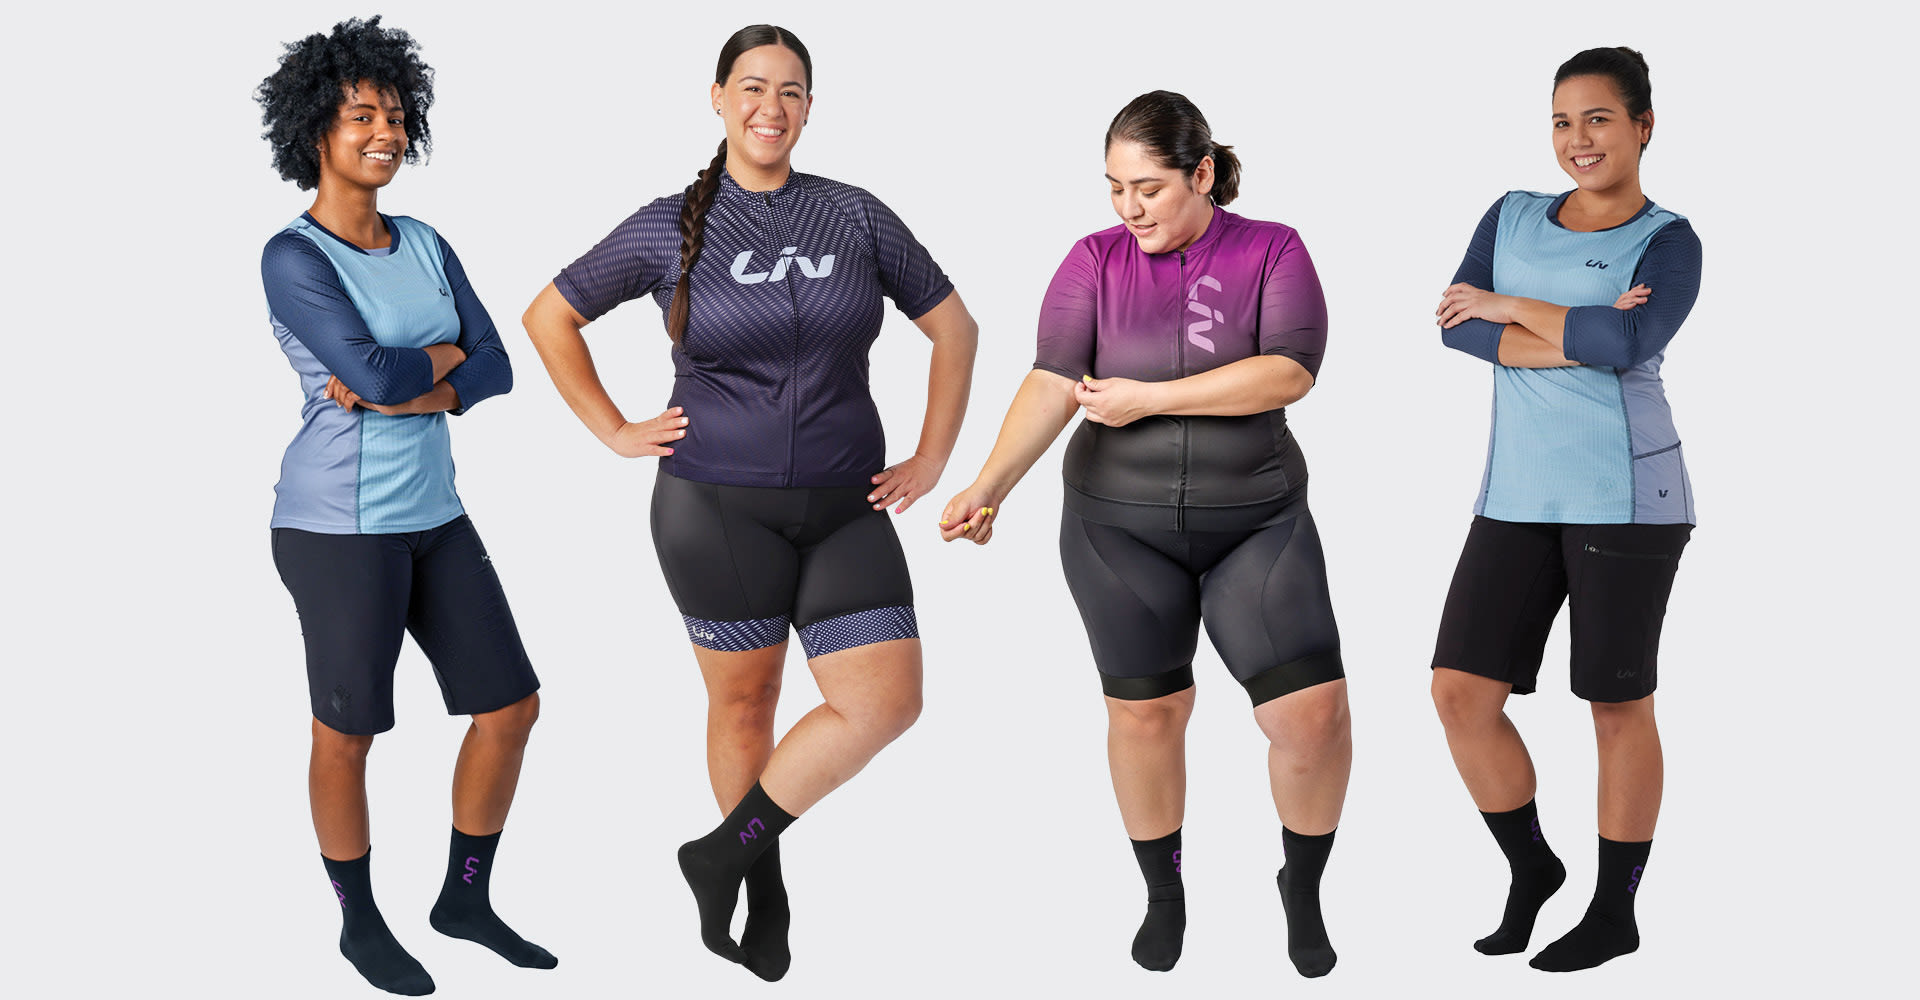 Introduction to Leggings + Shorts 